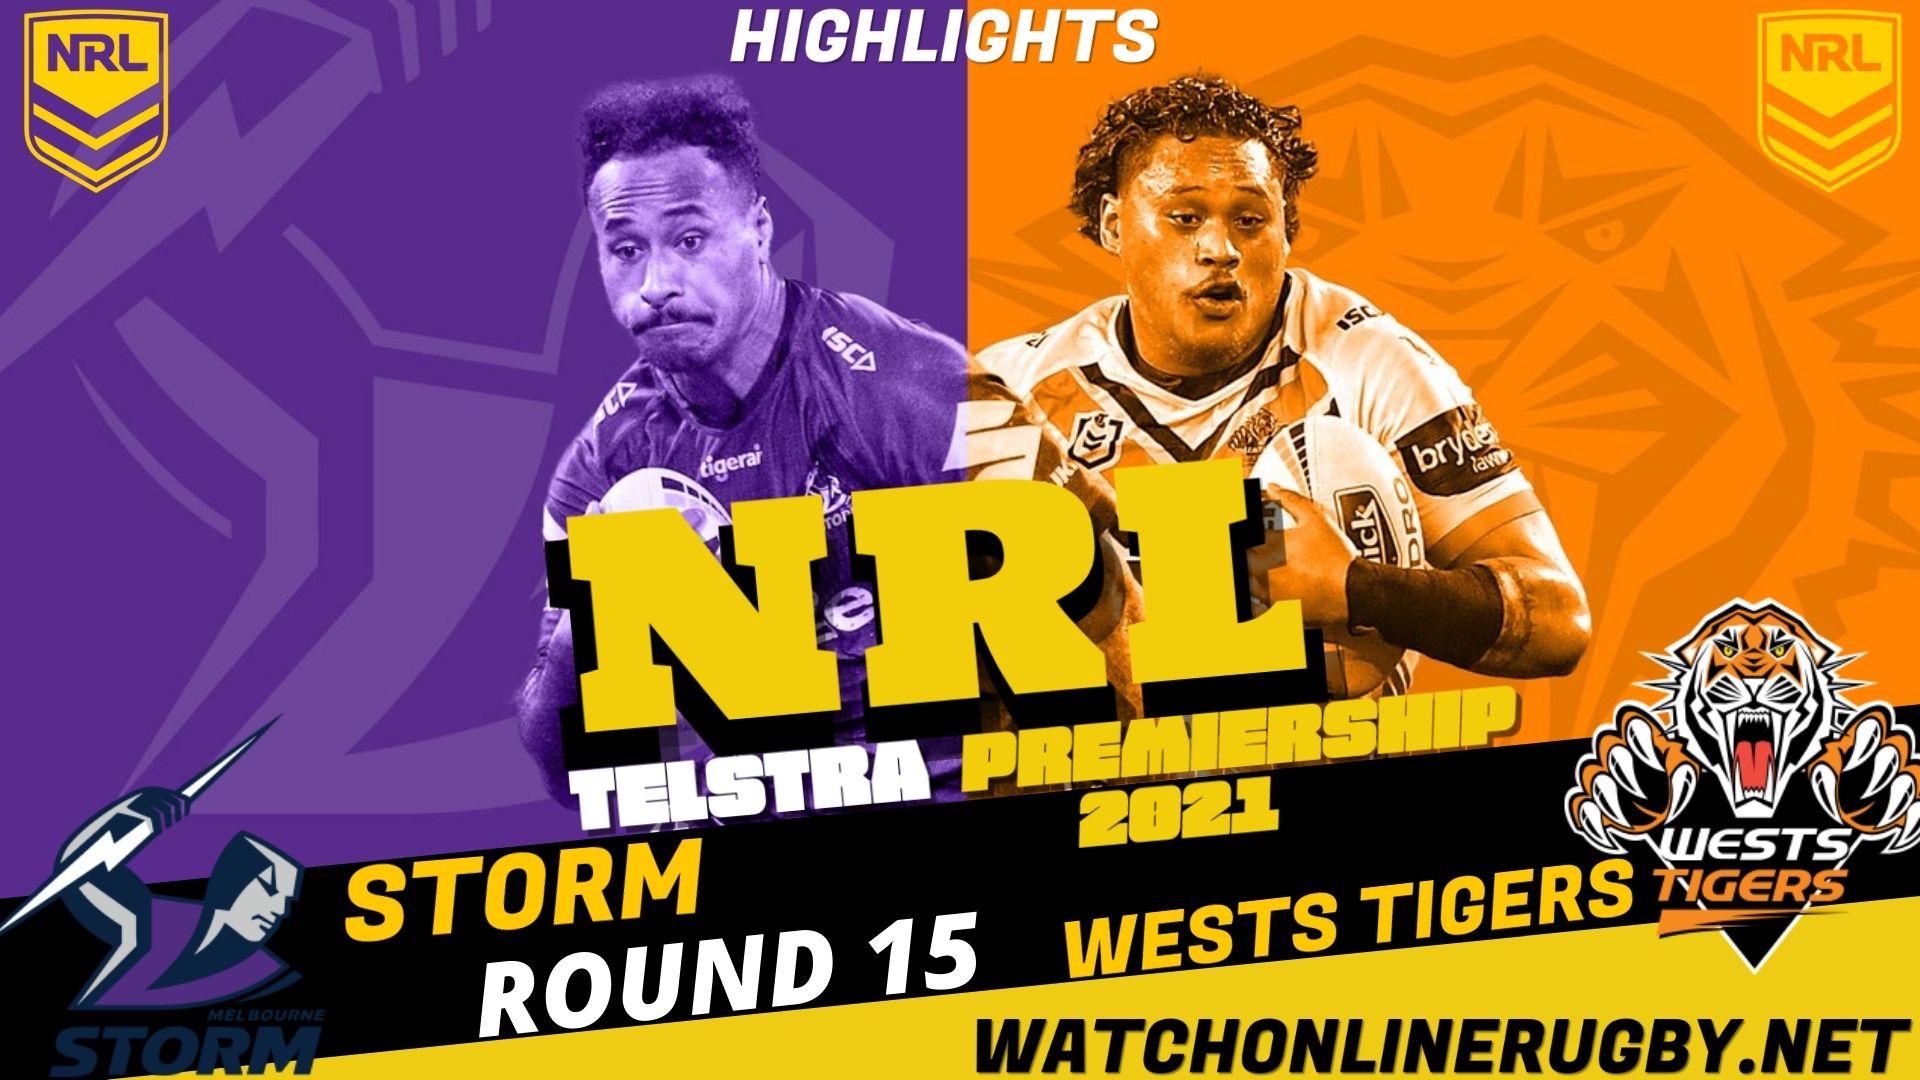 Storm Vs Wests Tigers Highlights RD 15 NRL Rugby